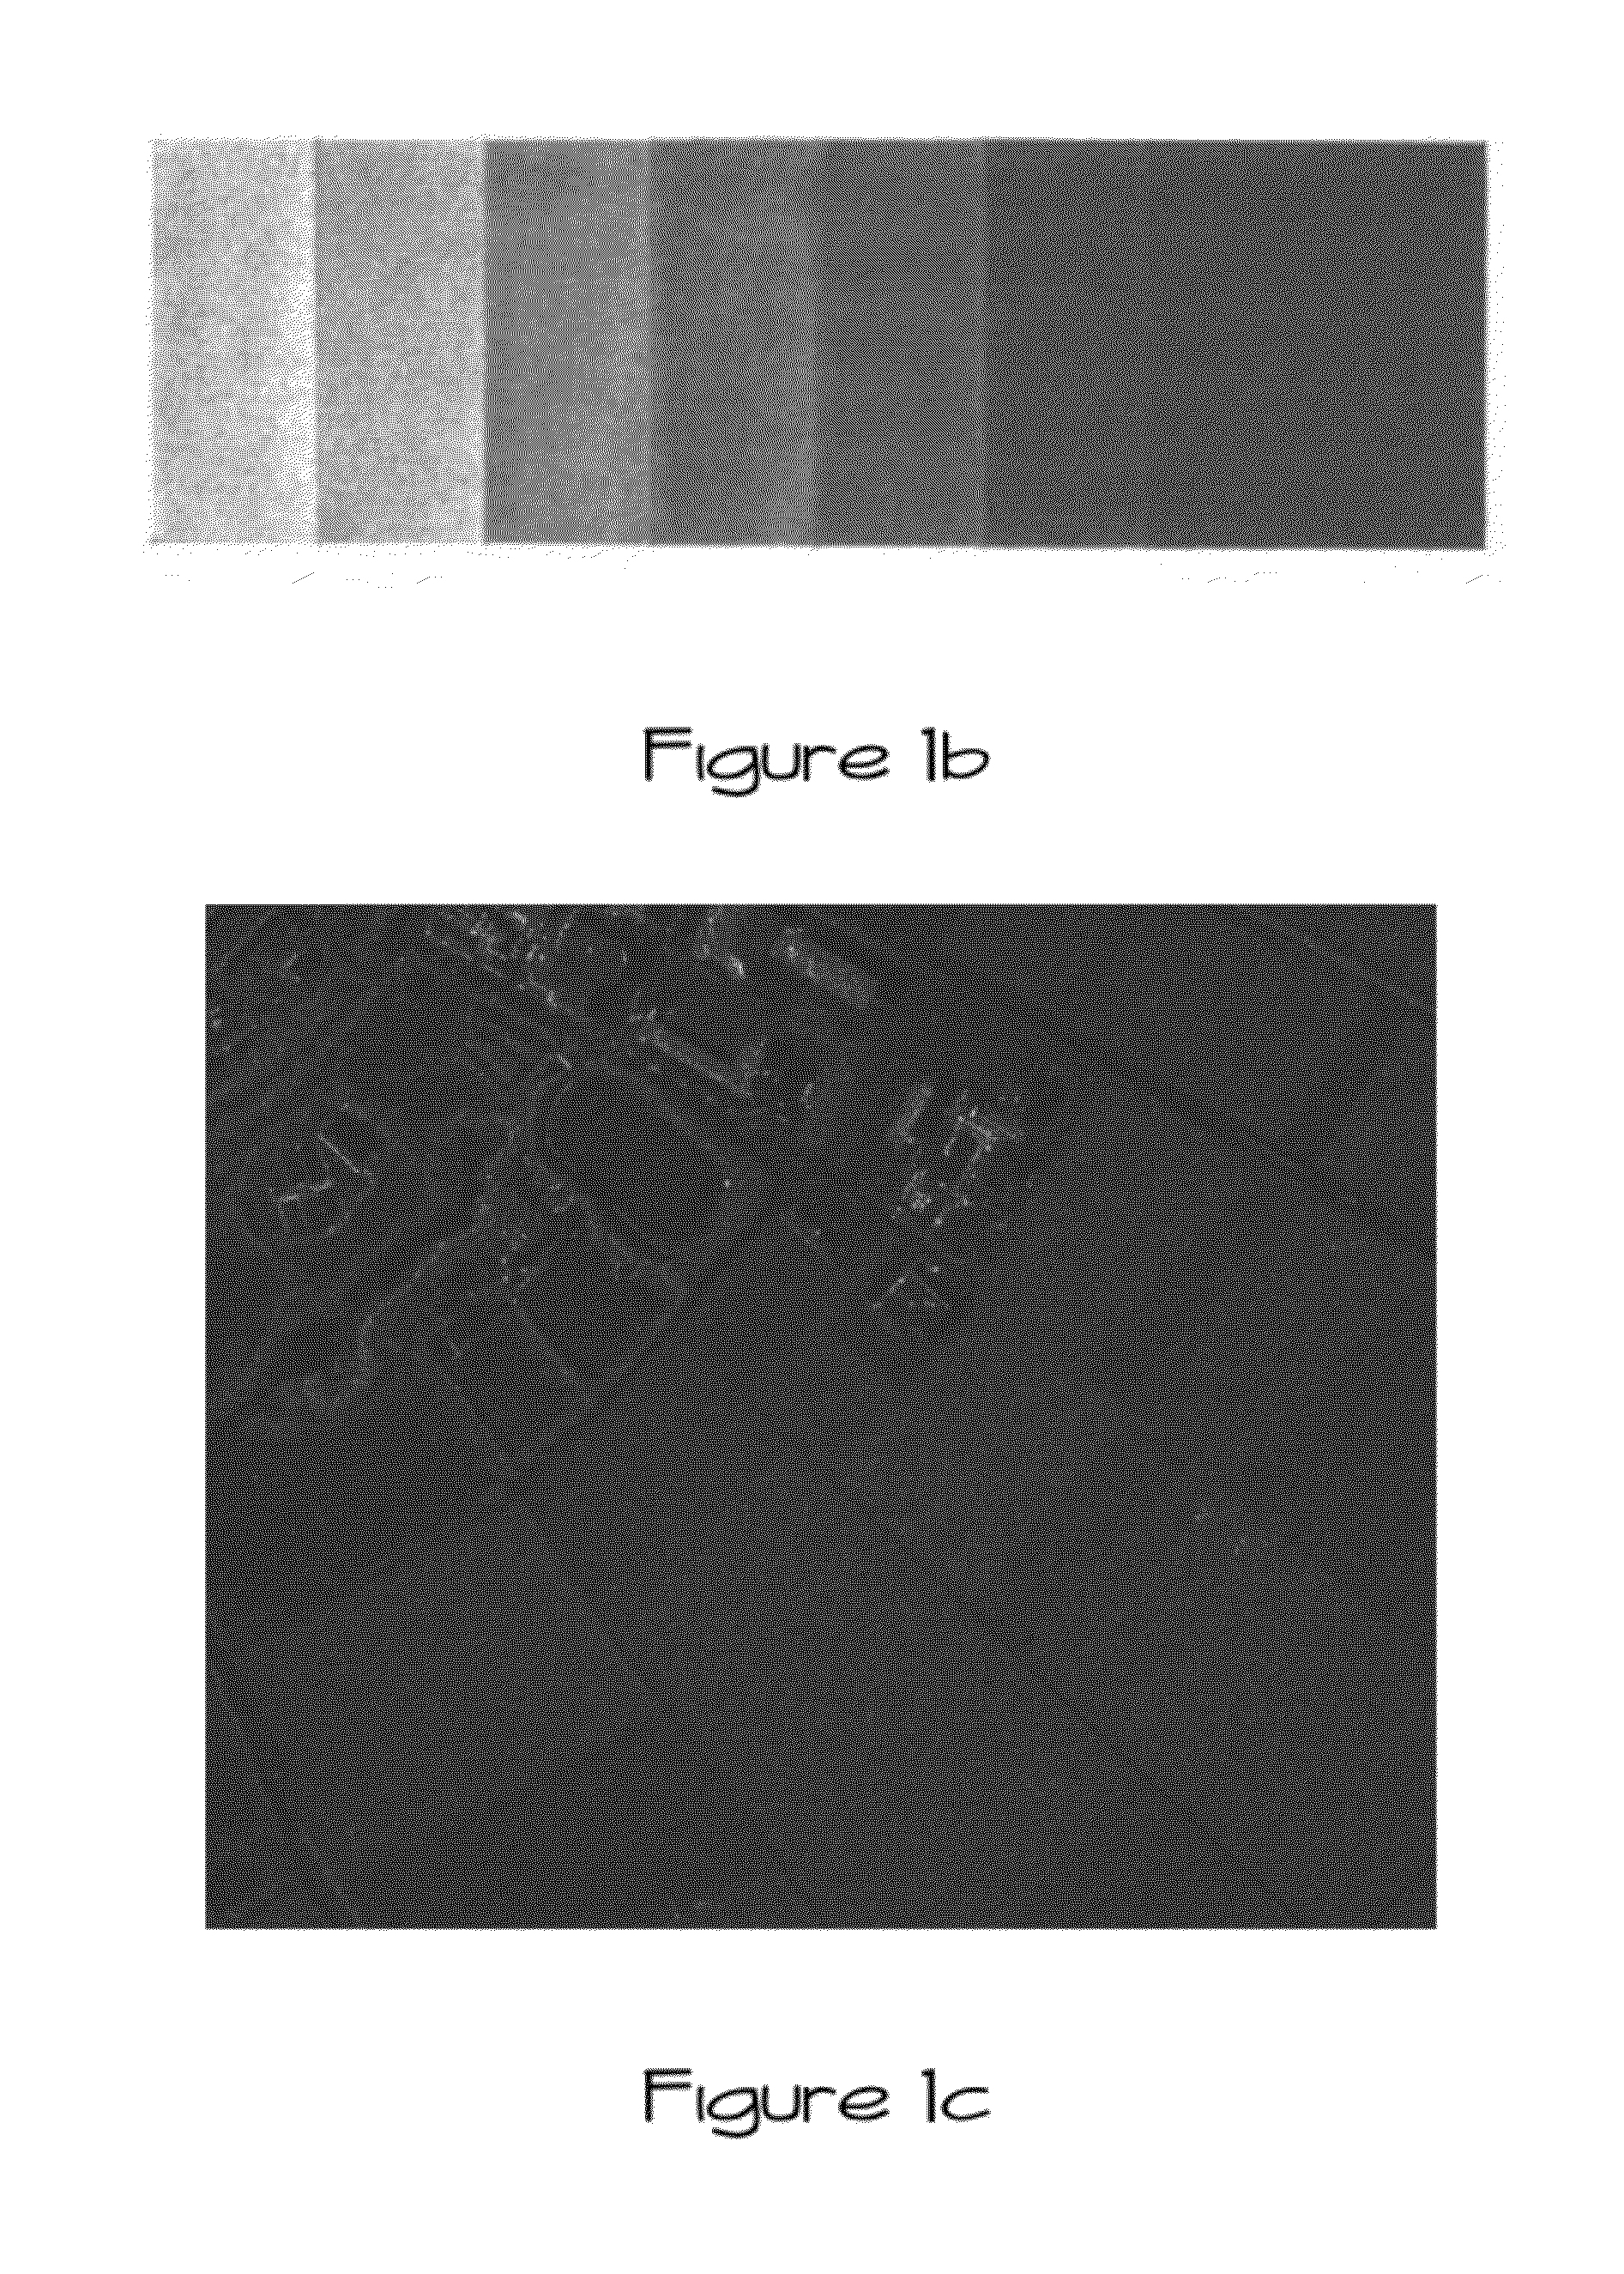 Multi-figure system for object feature extraction tracking and recognition